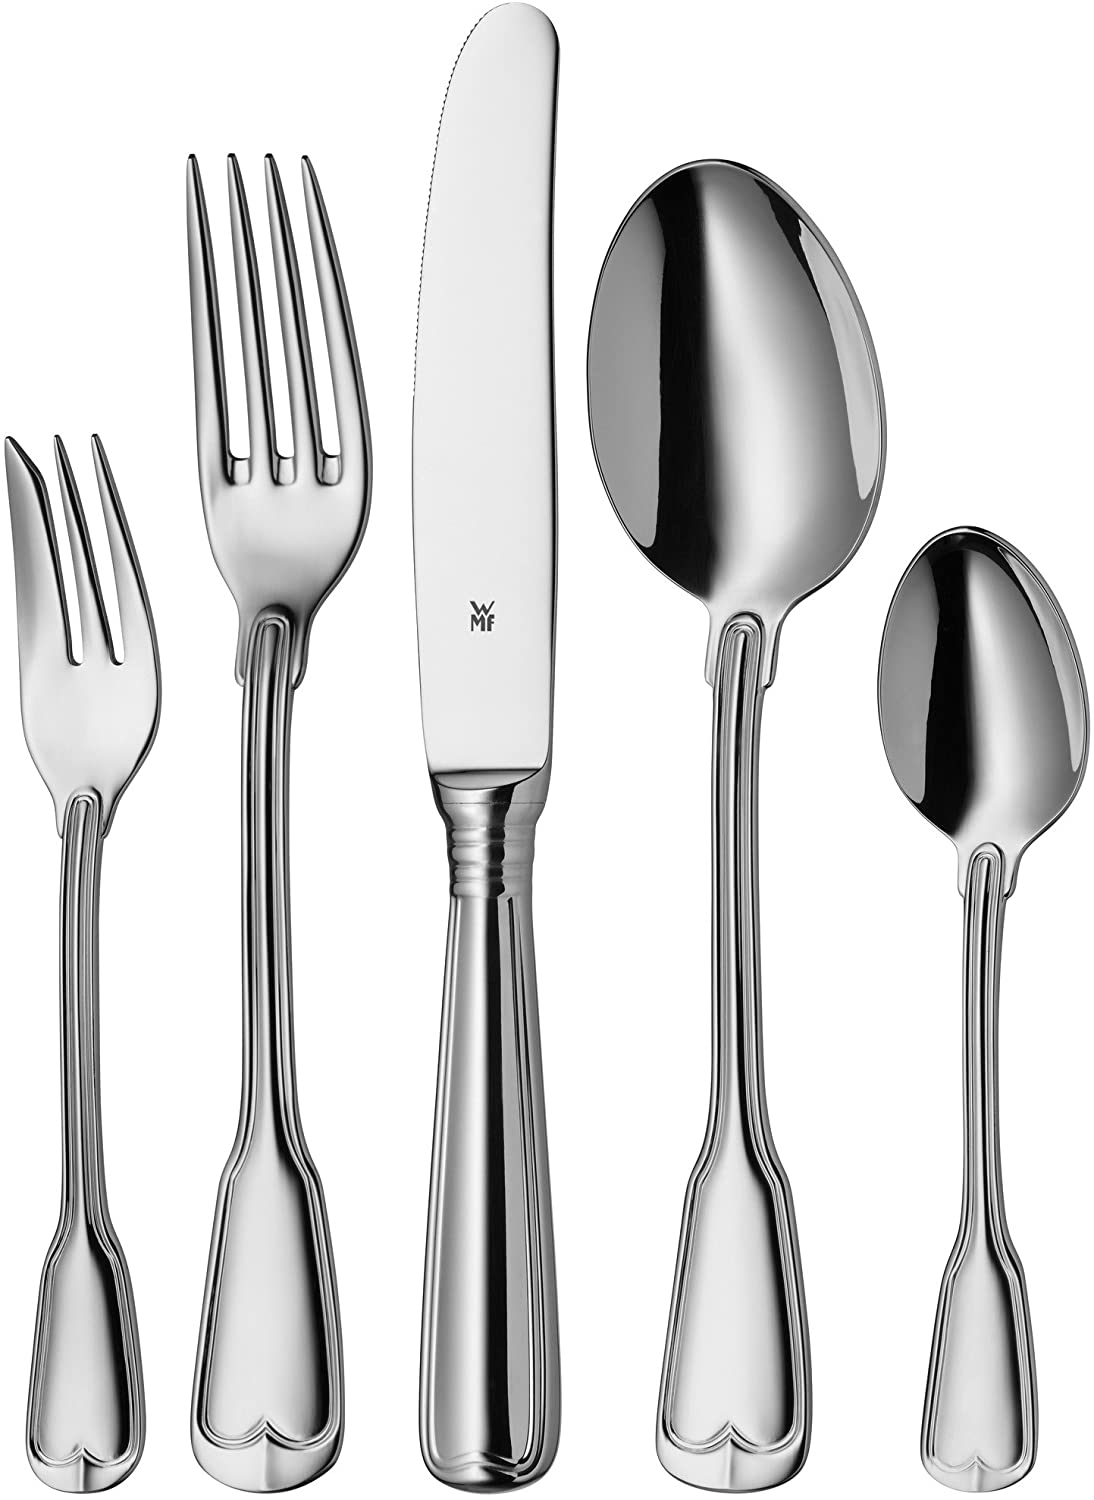 WMF Augsburger Faden Cutlery Set for 12 People 66 Pieces 60 Pieces with Serving Cutlery Set Knife Blade Polished Cromargan Stainless Steel Shiny Dishwasher Safe